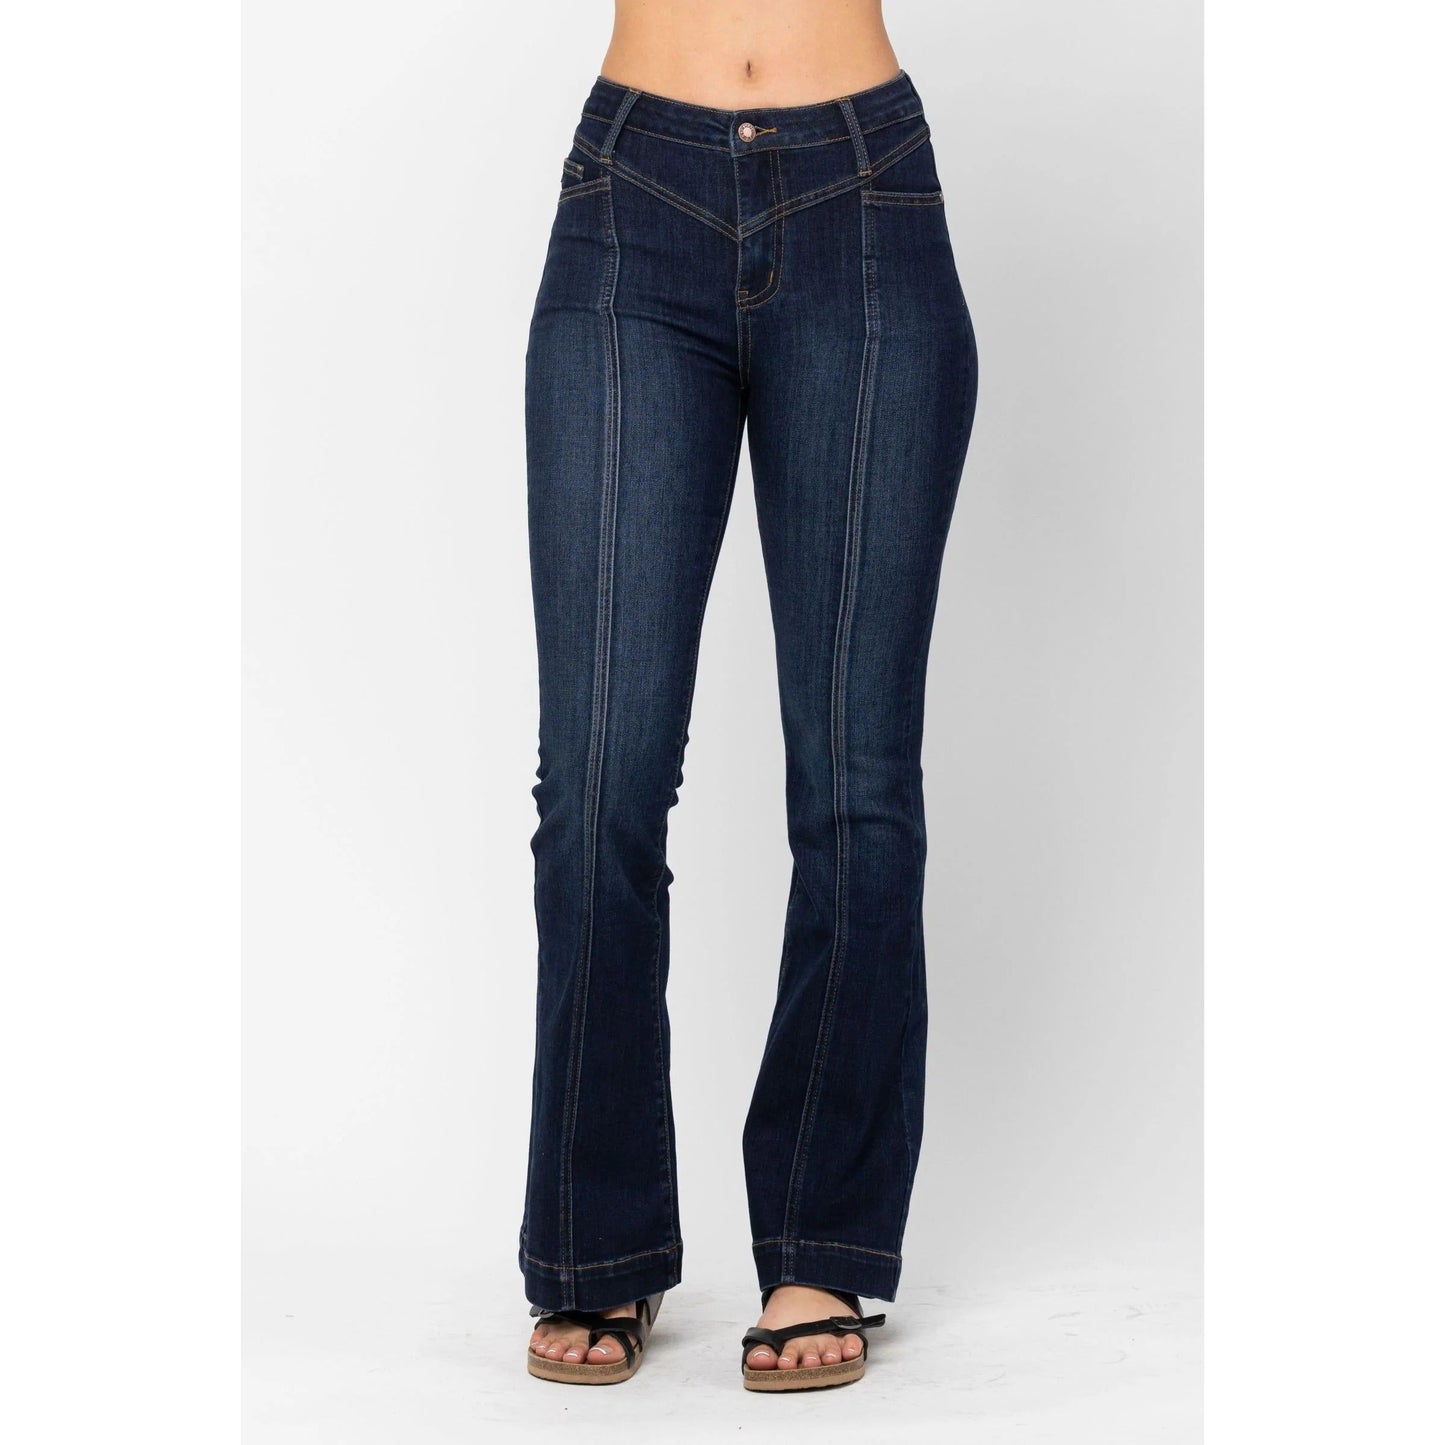 Judy Blue Linda High Waist Flare Jeans - Rhapsody and Renascence